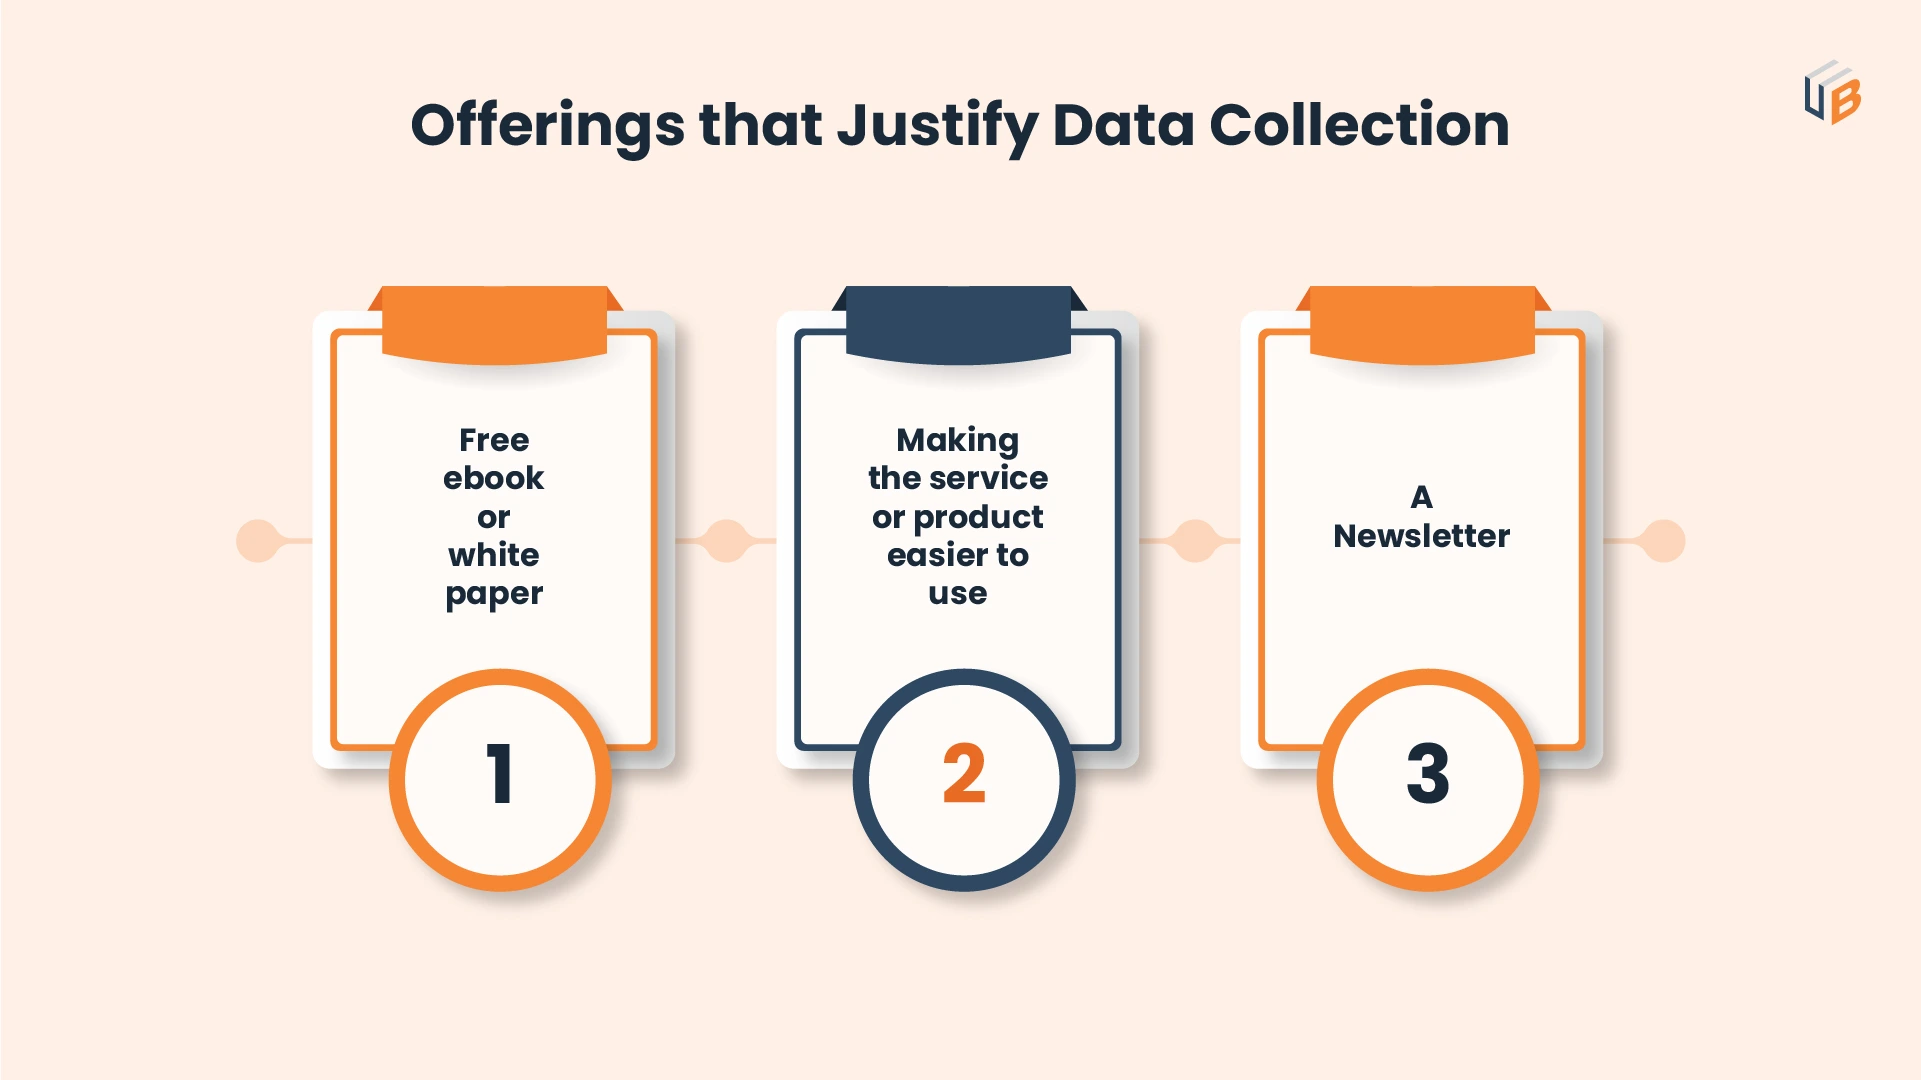 Offerings that justifies data collection